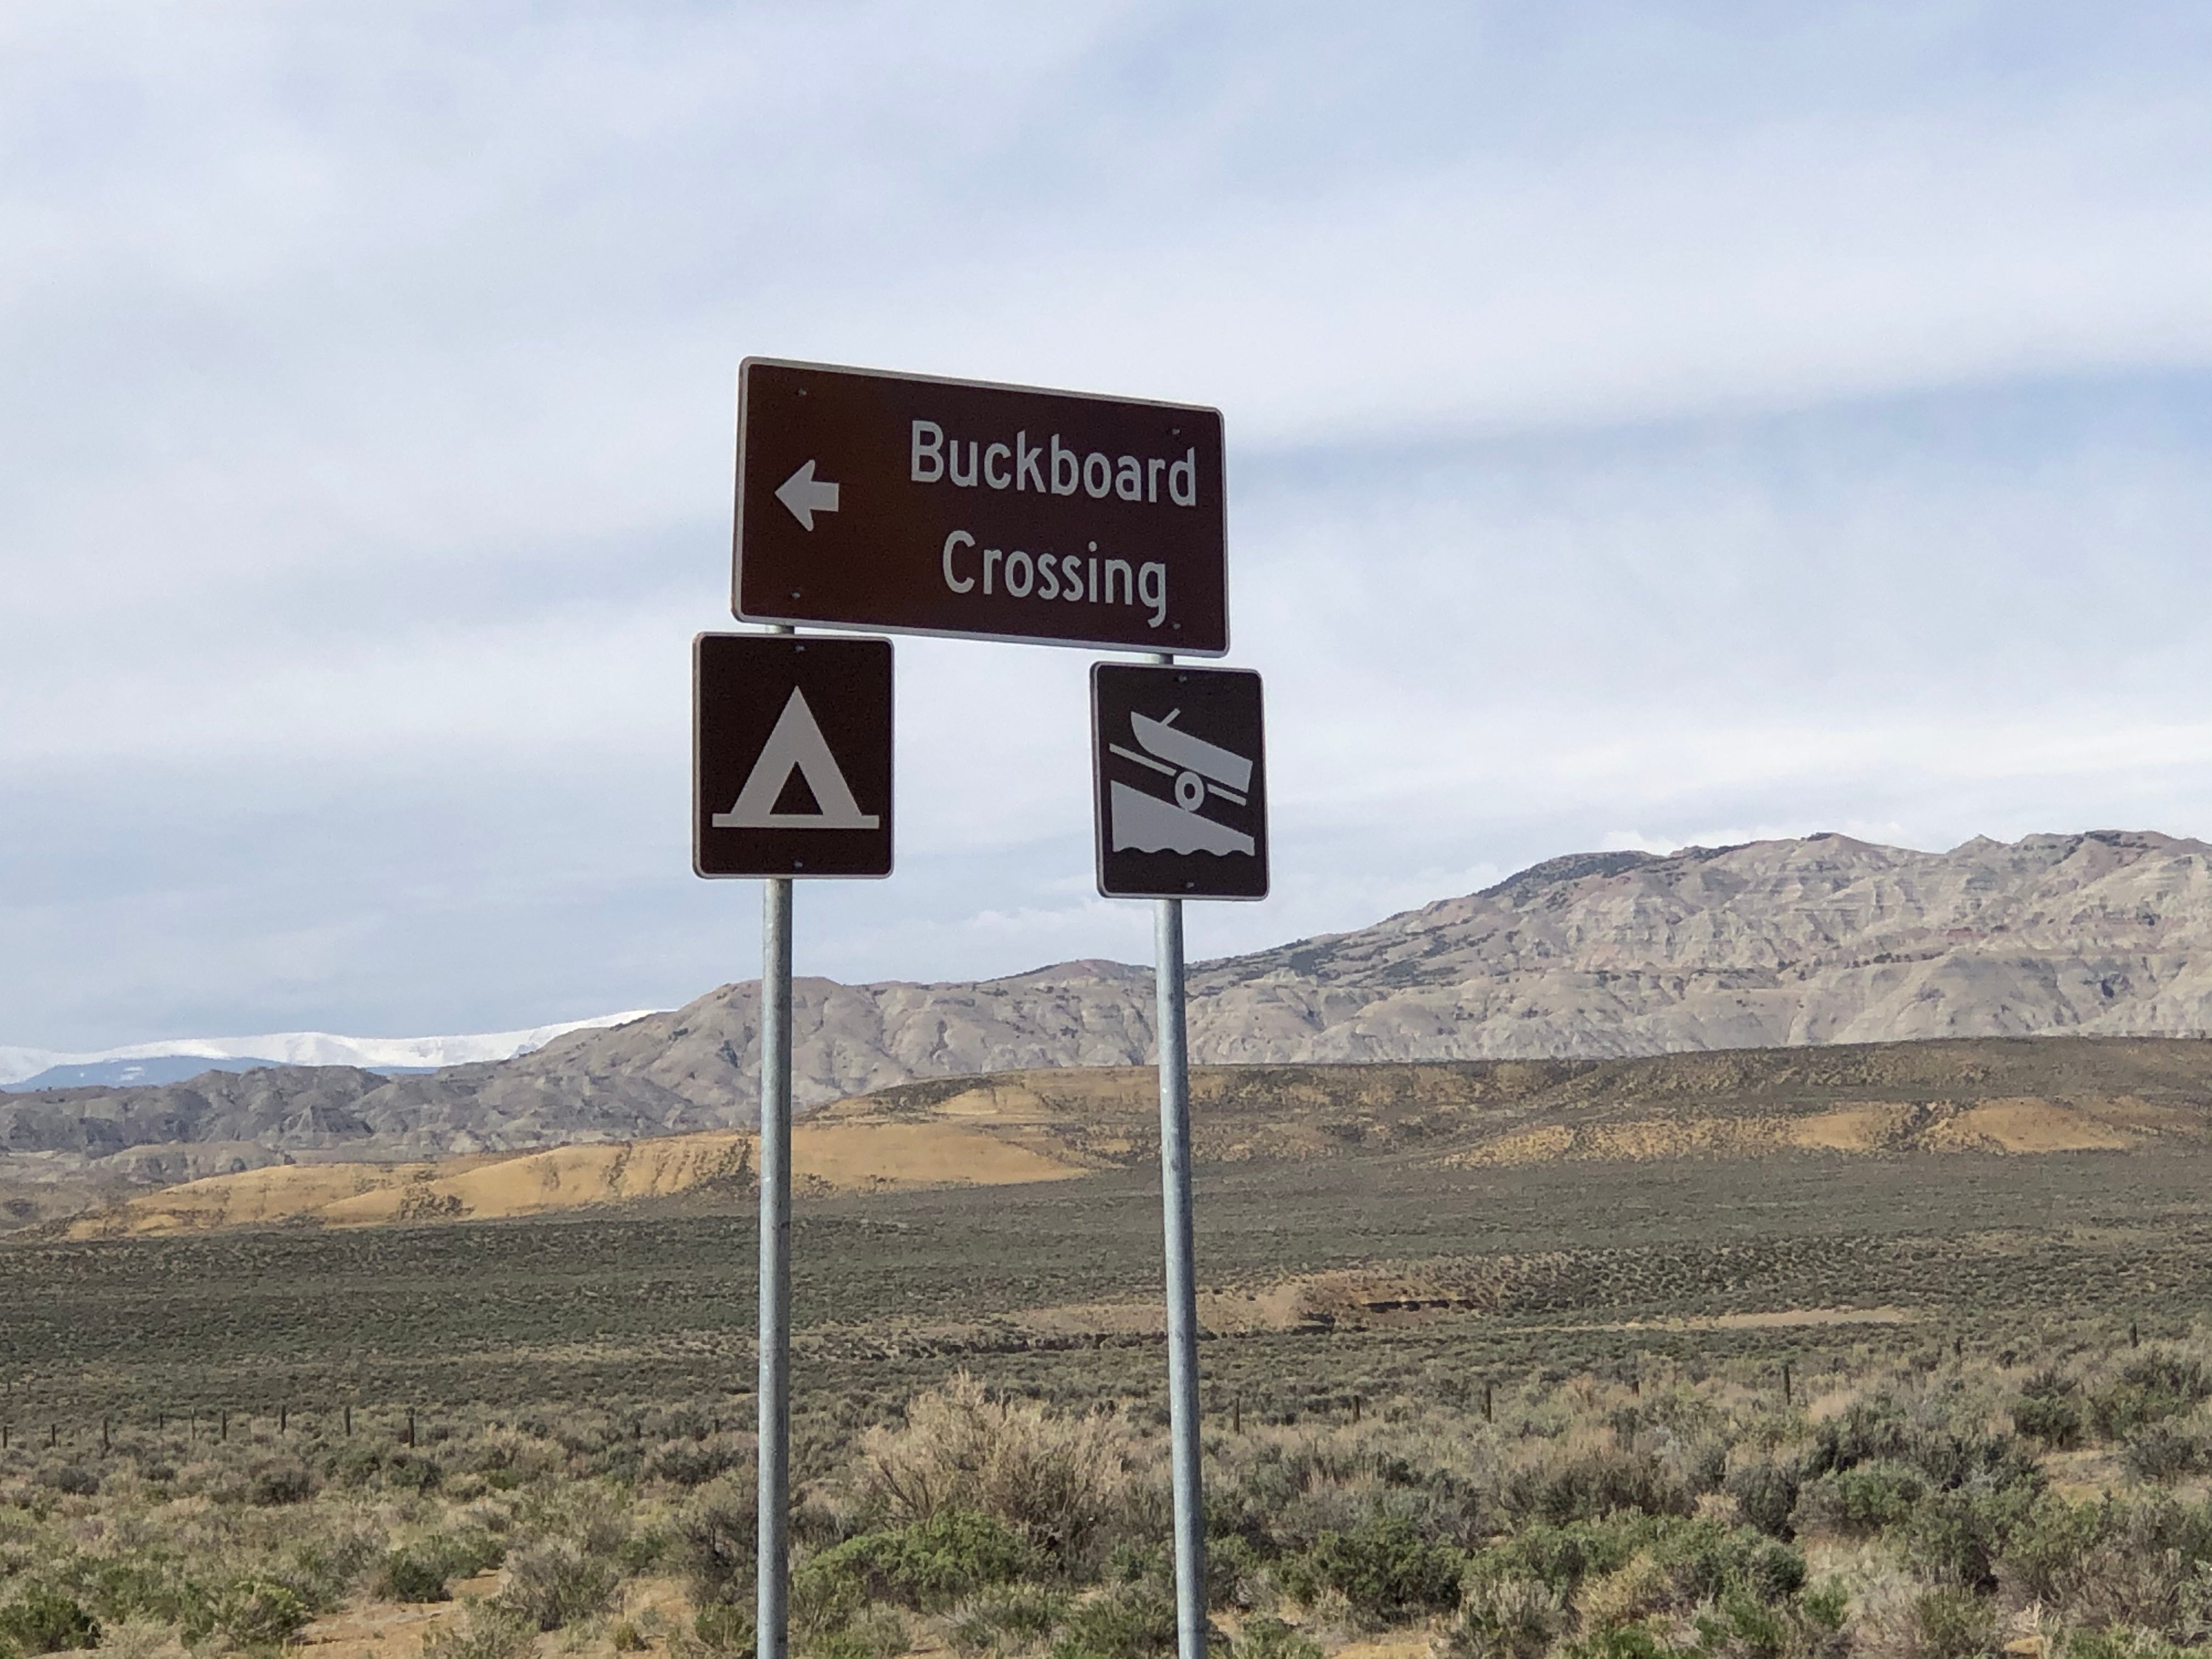 Camper submitted image from Buckboard Crossing - 5